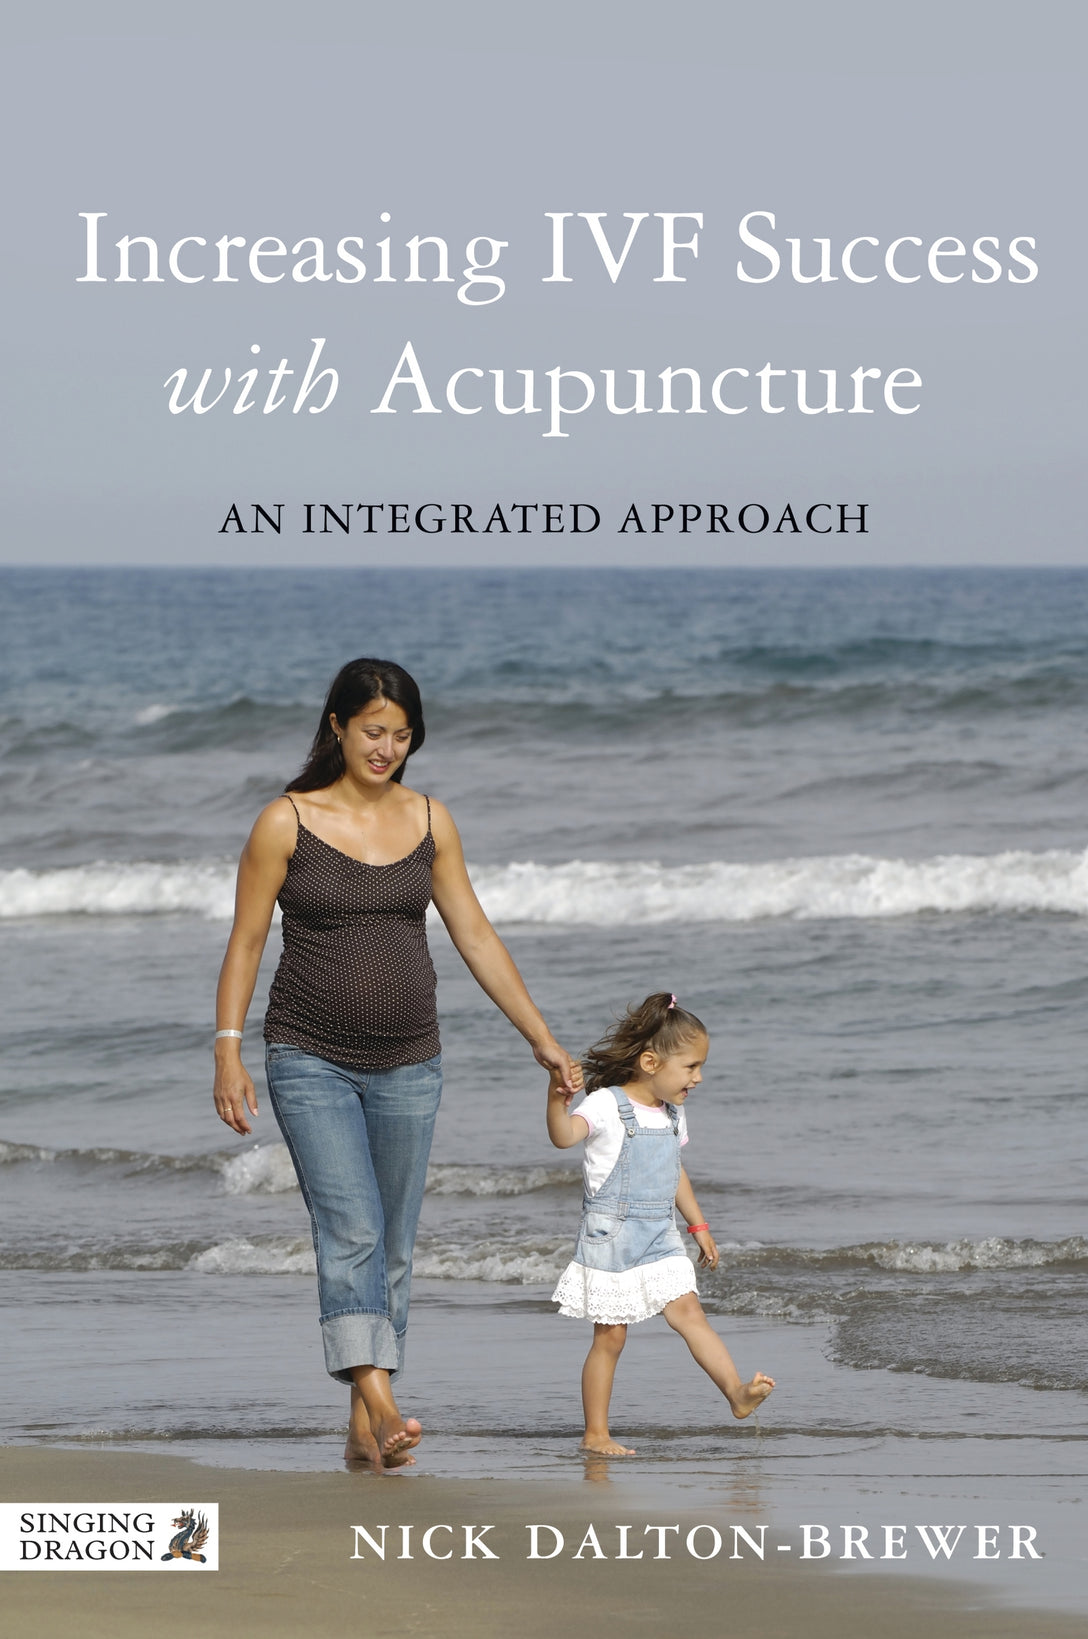 Increasing IVF Success with Acupuncture by Nick Dalton-Brewer